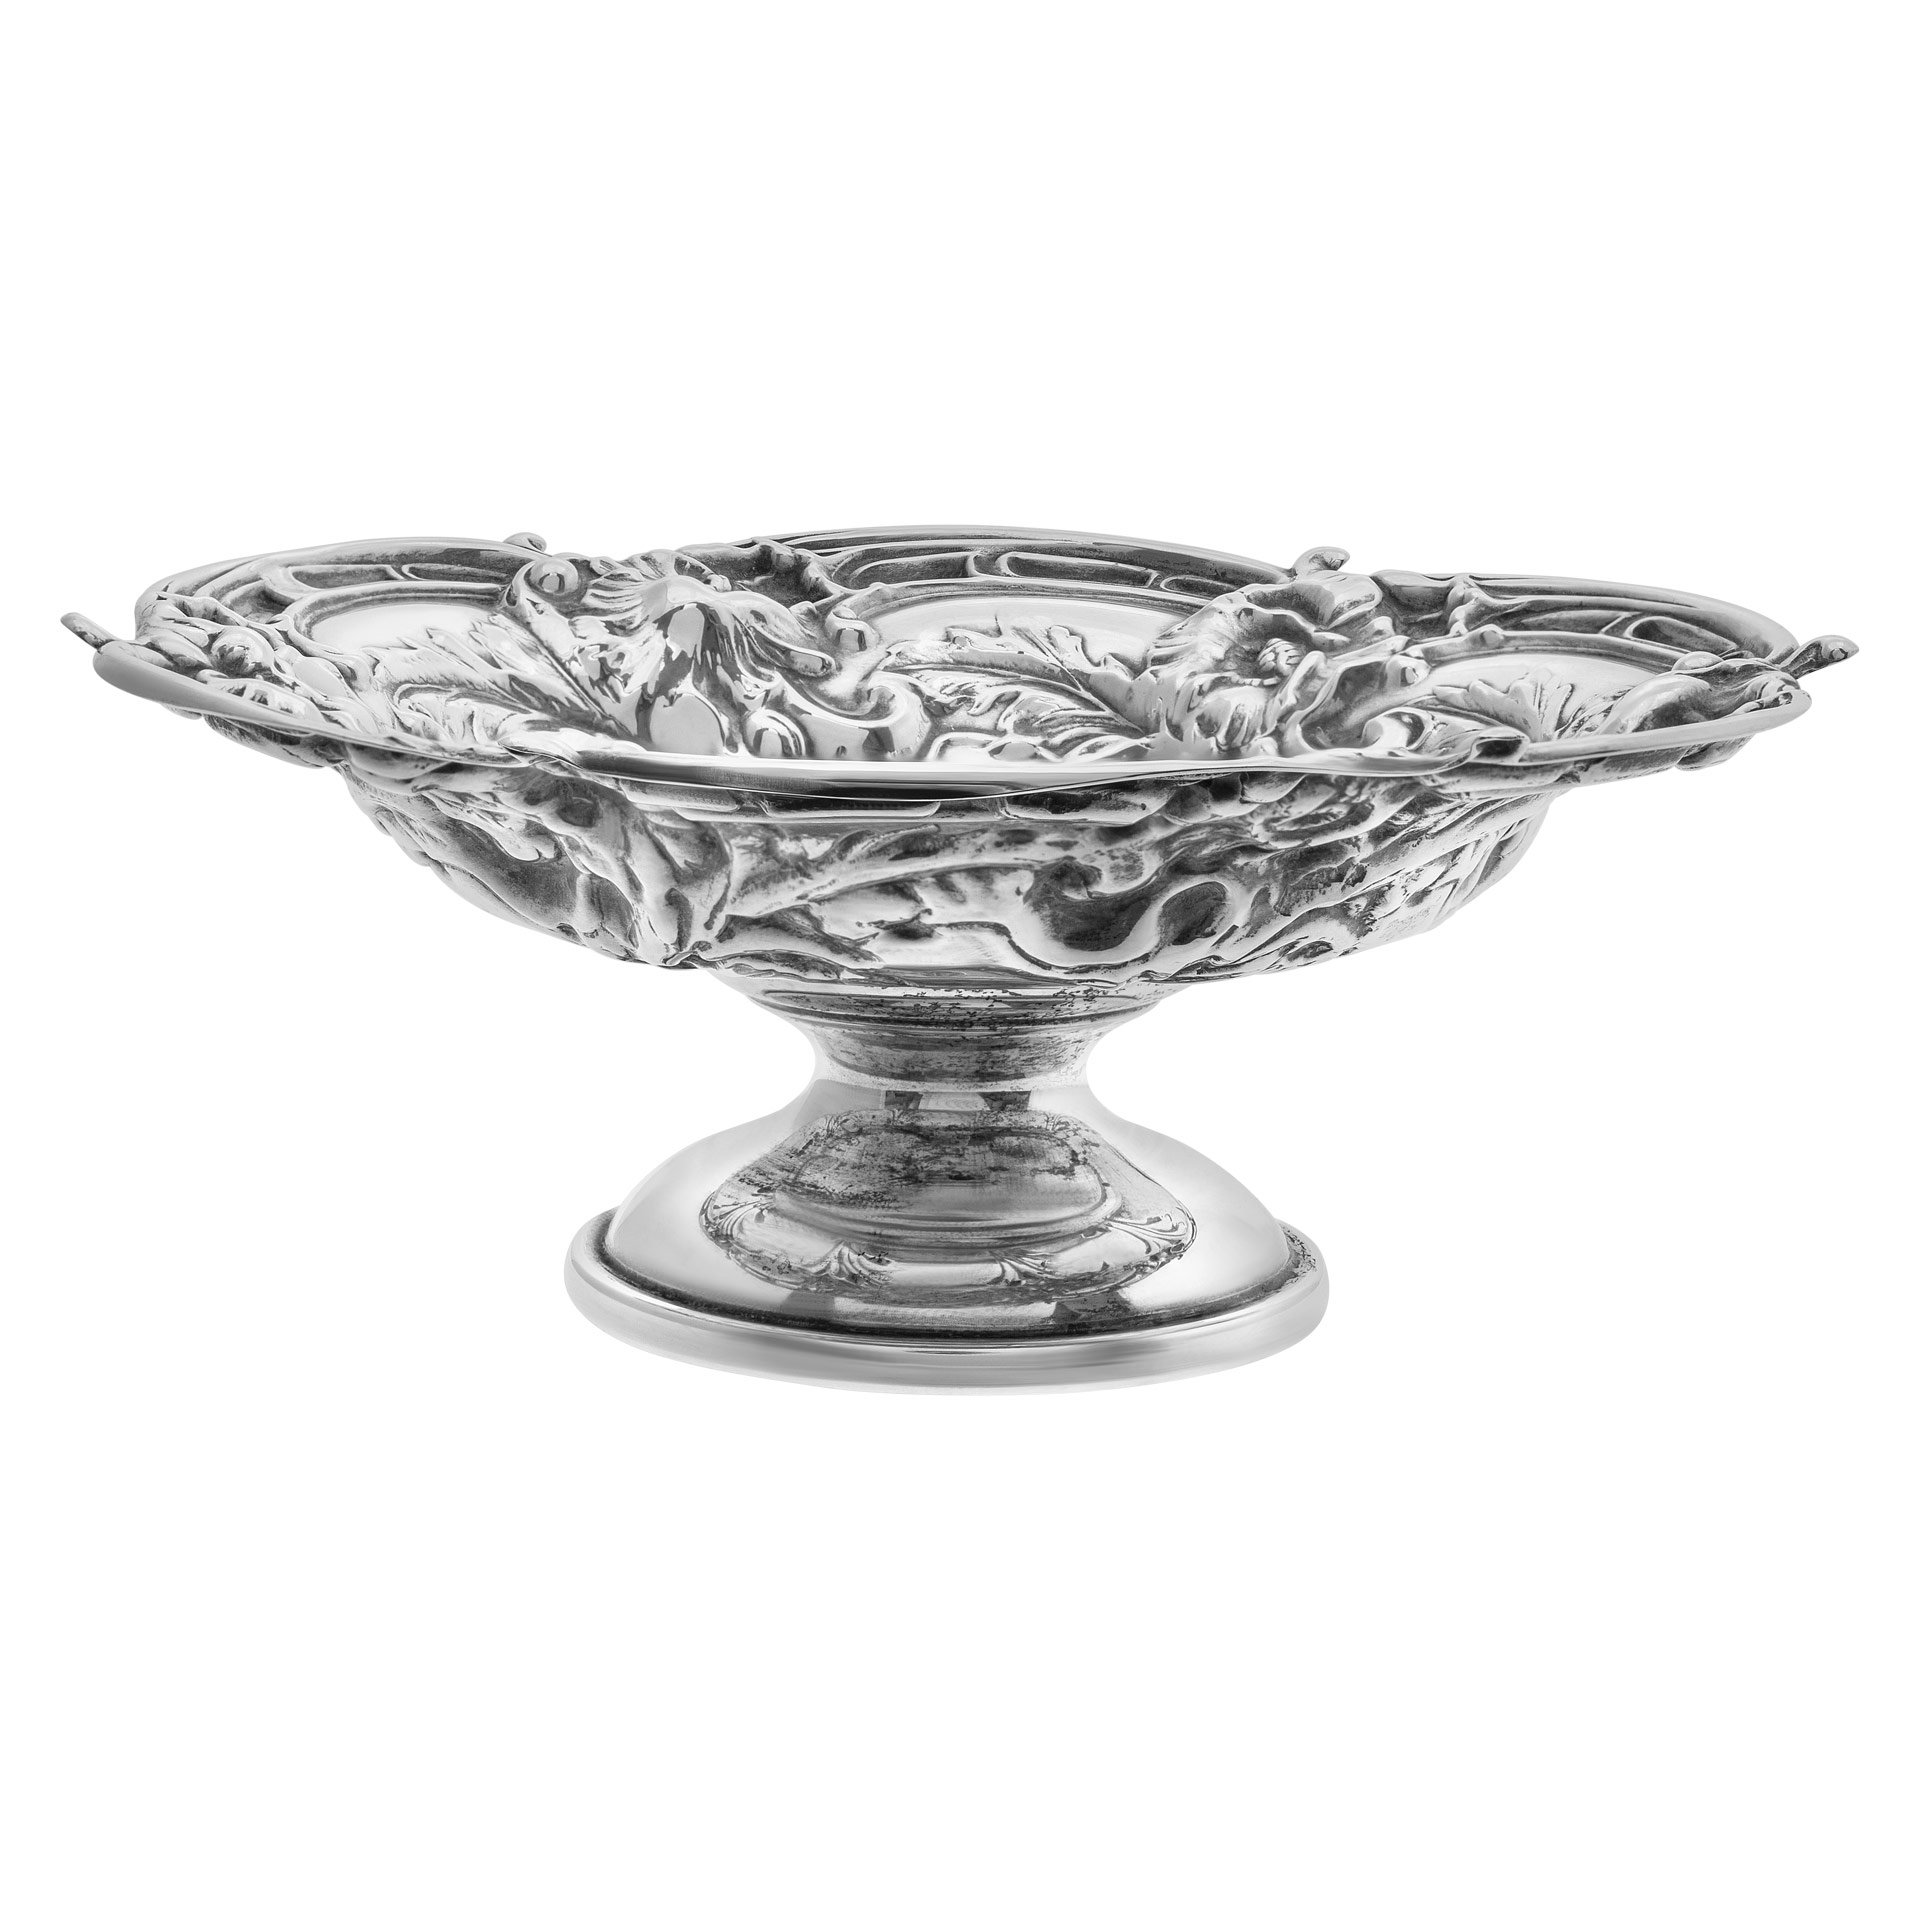 "Les Cinq Fleurs" patented in 1900 by Reed & Barton, sterling silver bon bon dish.